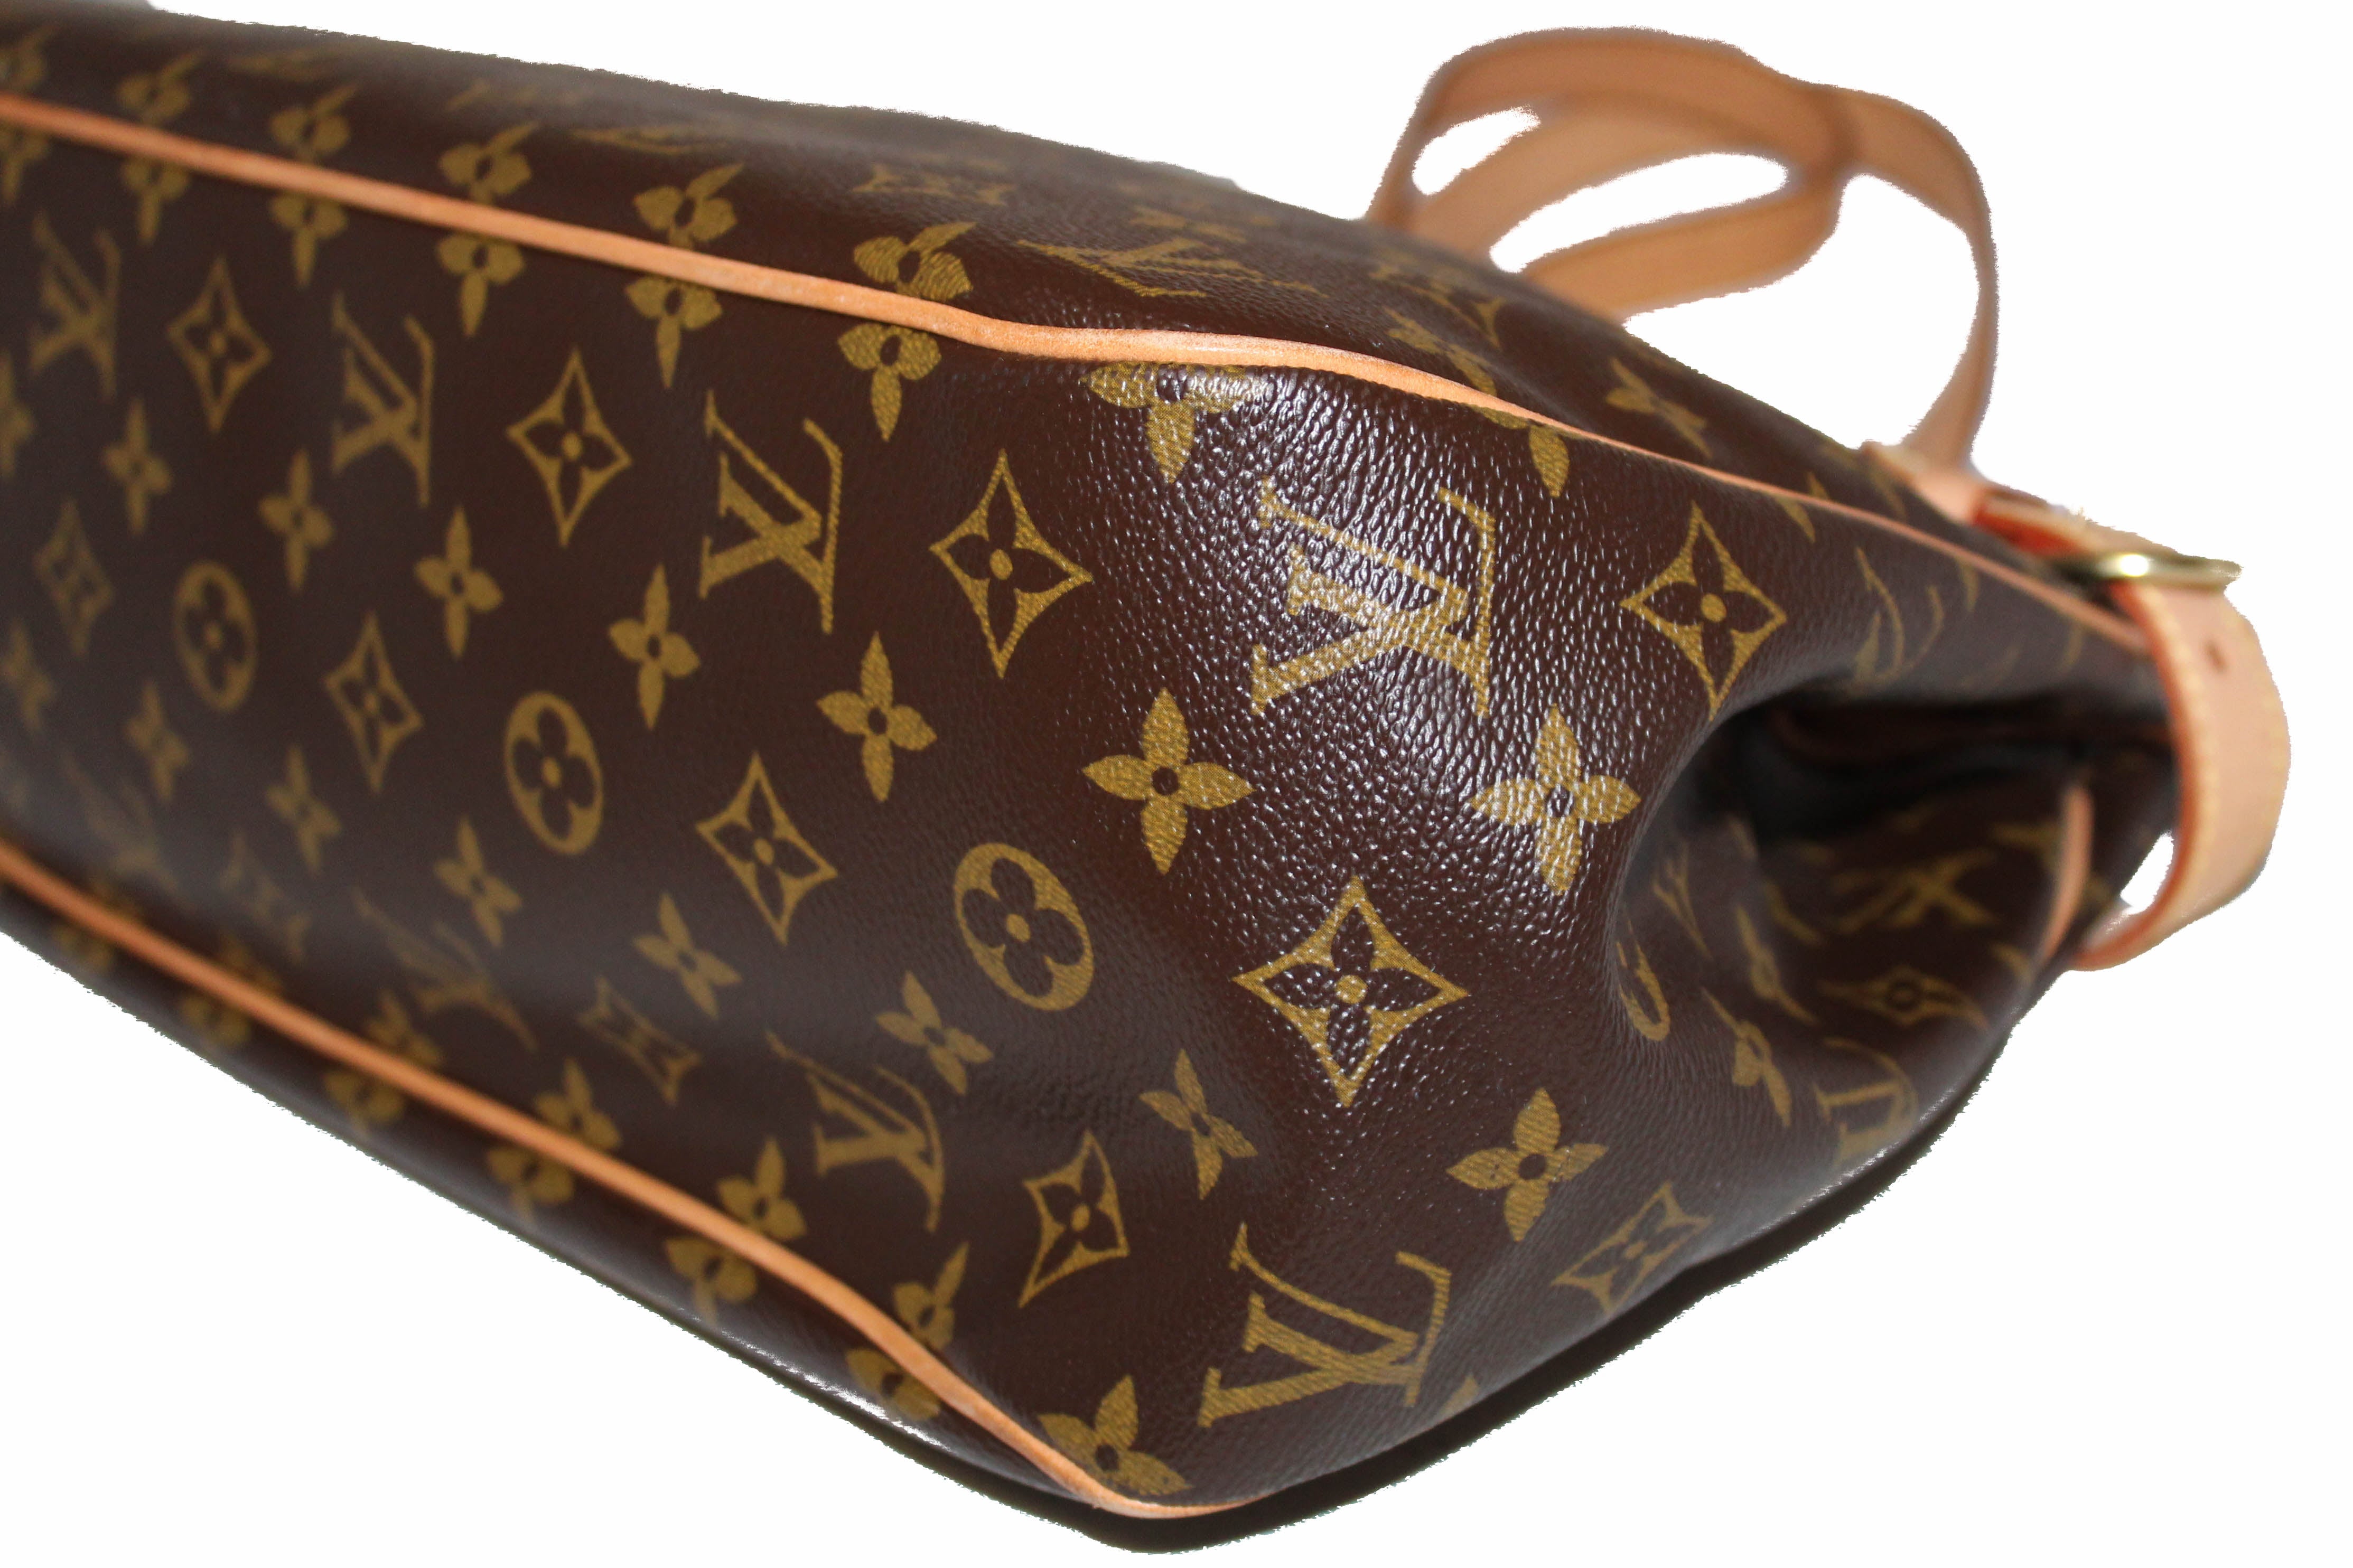 BagButler - With the classic Louis Vuitton Monogram canvas